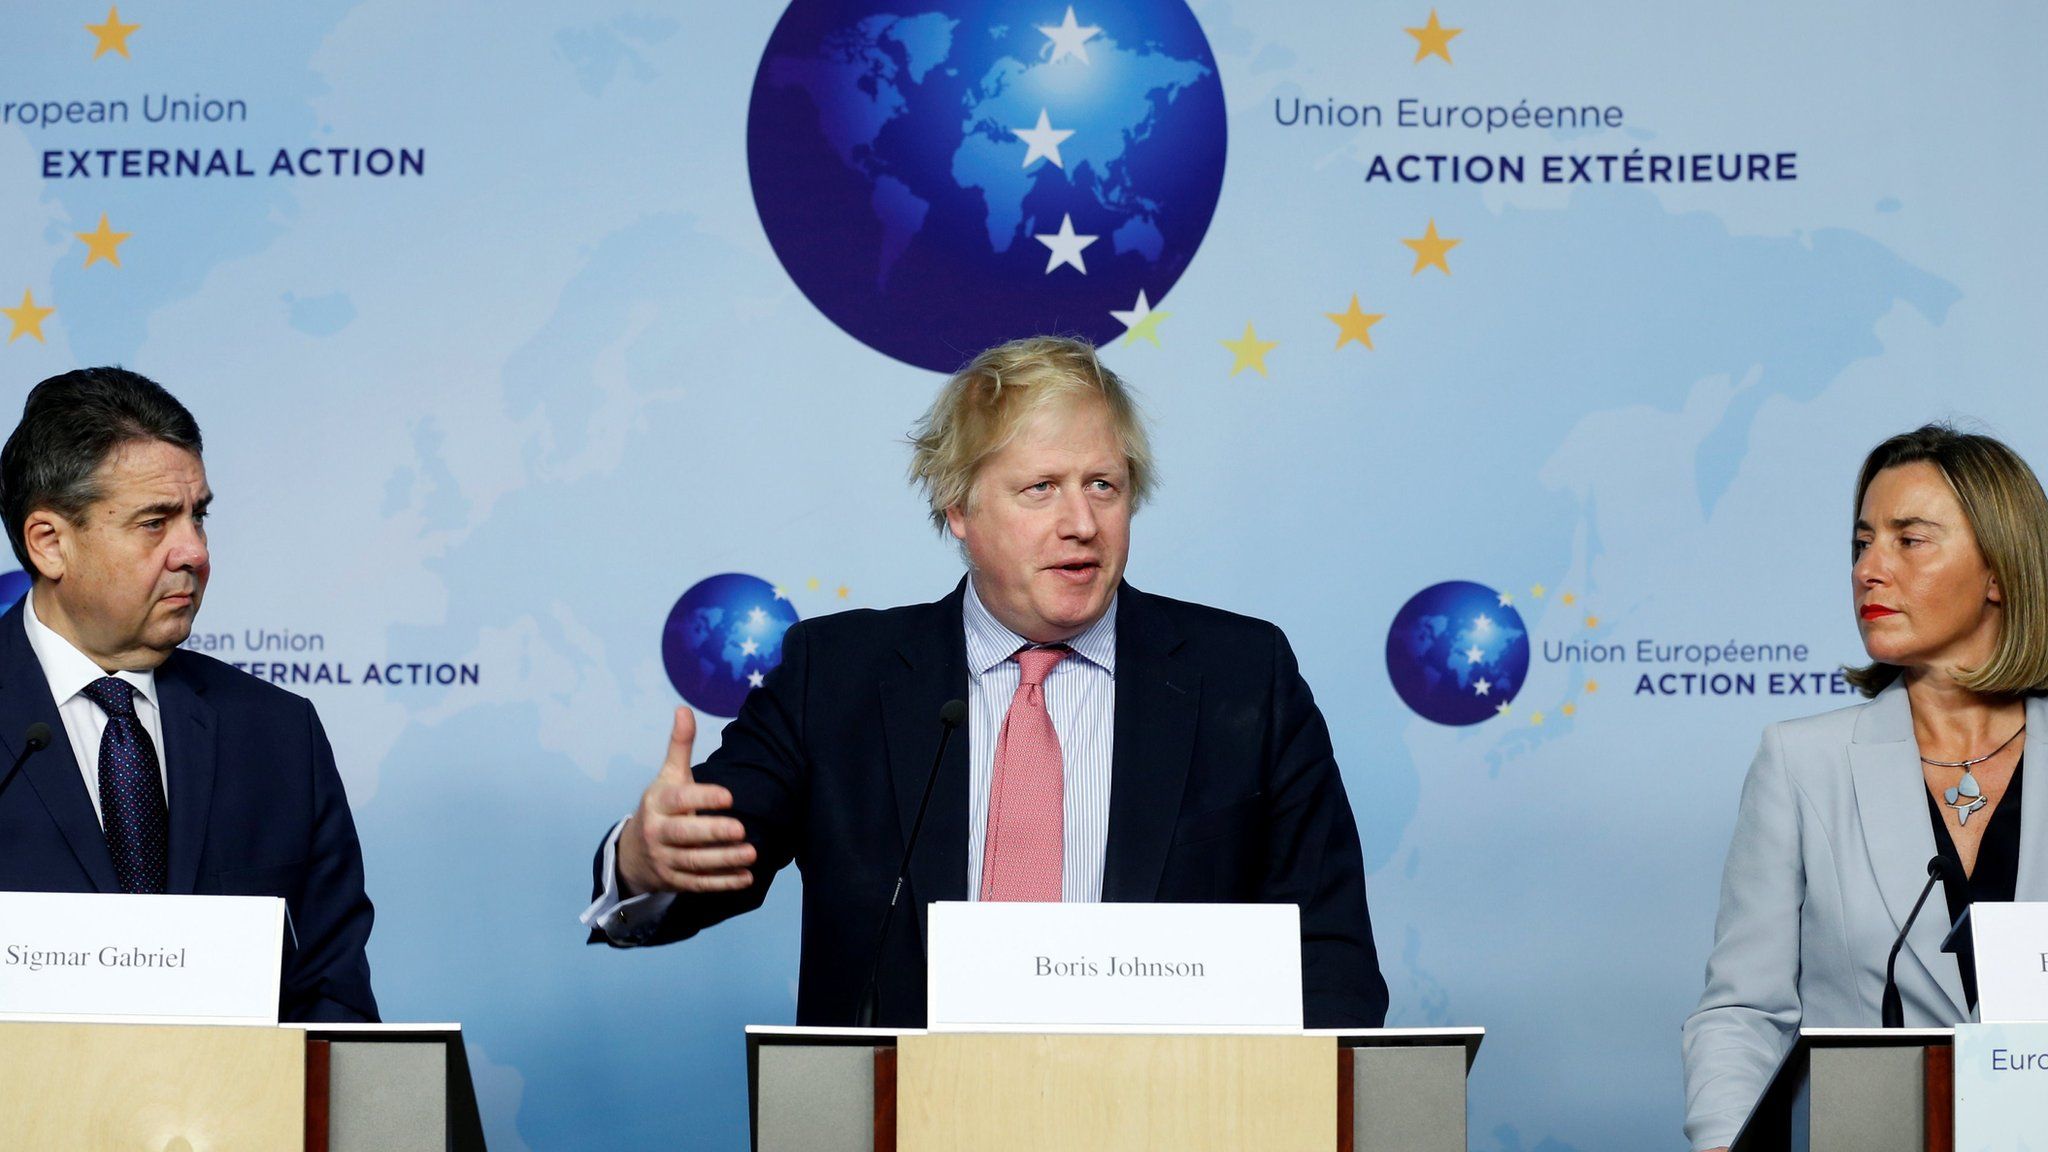 UK Foreign Secretary Boris Johnson speaks at a joint news conference in Brussels with Germany's Sigmar Gabriel (L) and EU foreign policy chief Federica Mogherini (R)